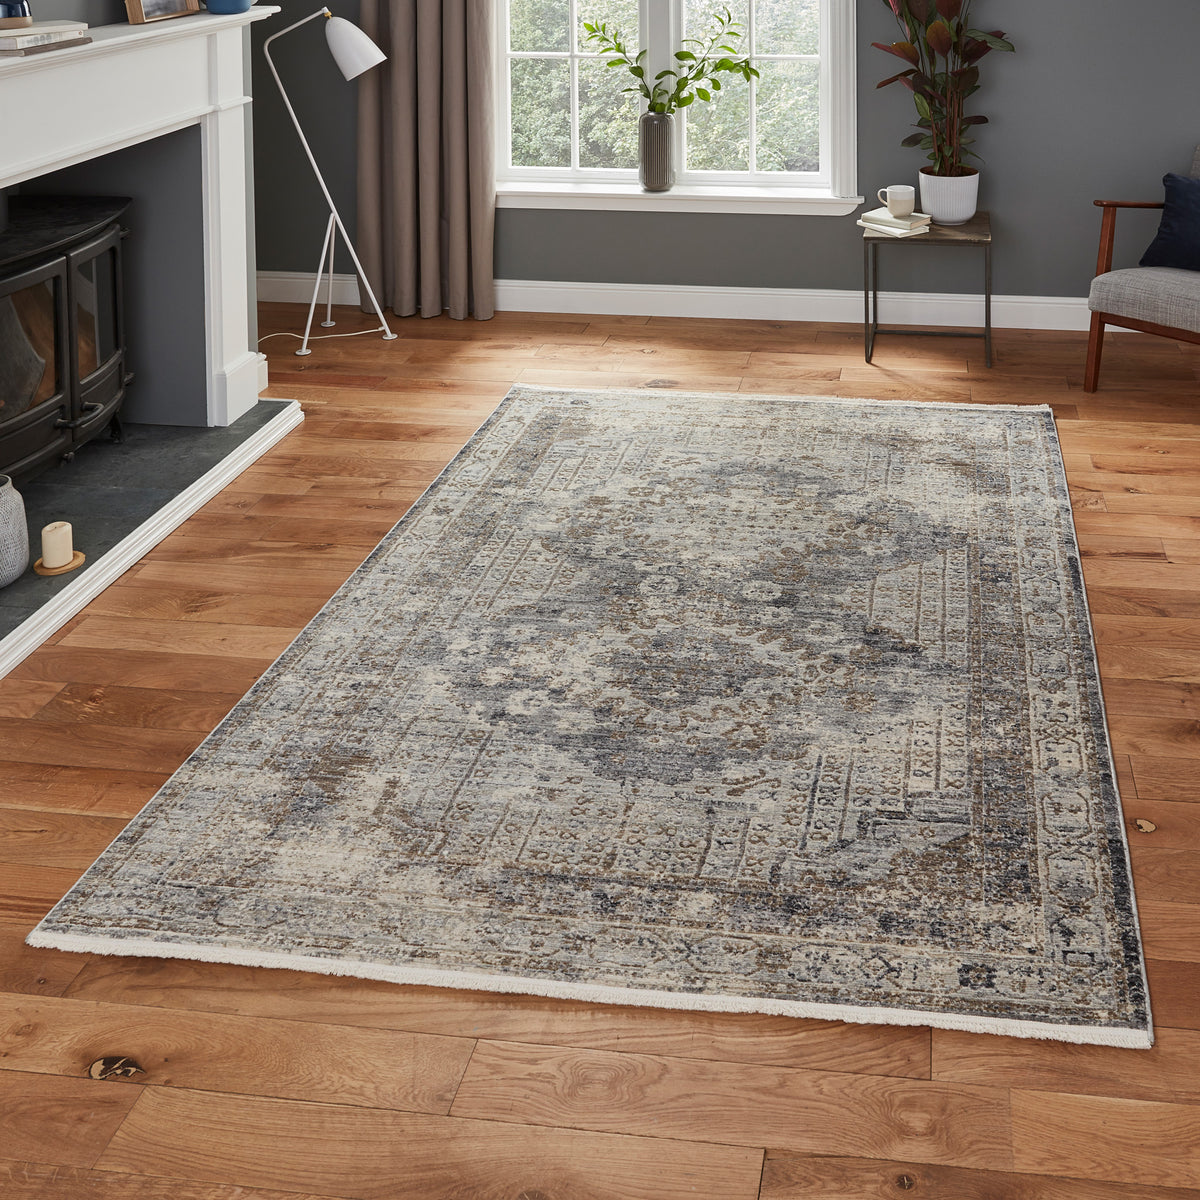 Thea Distressed Grey Vintage Rug for living room